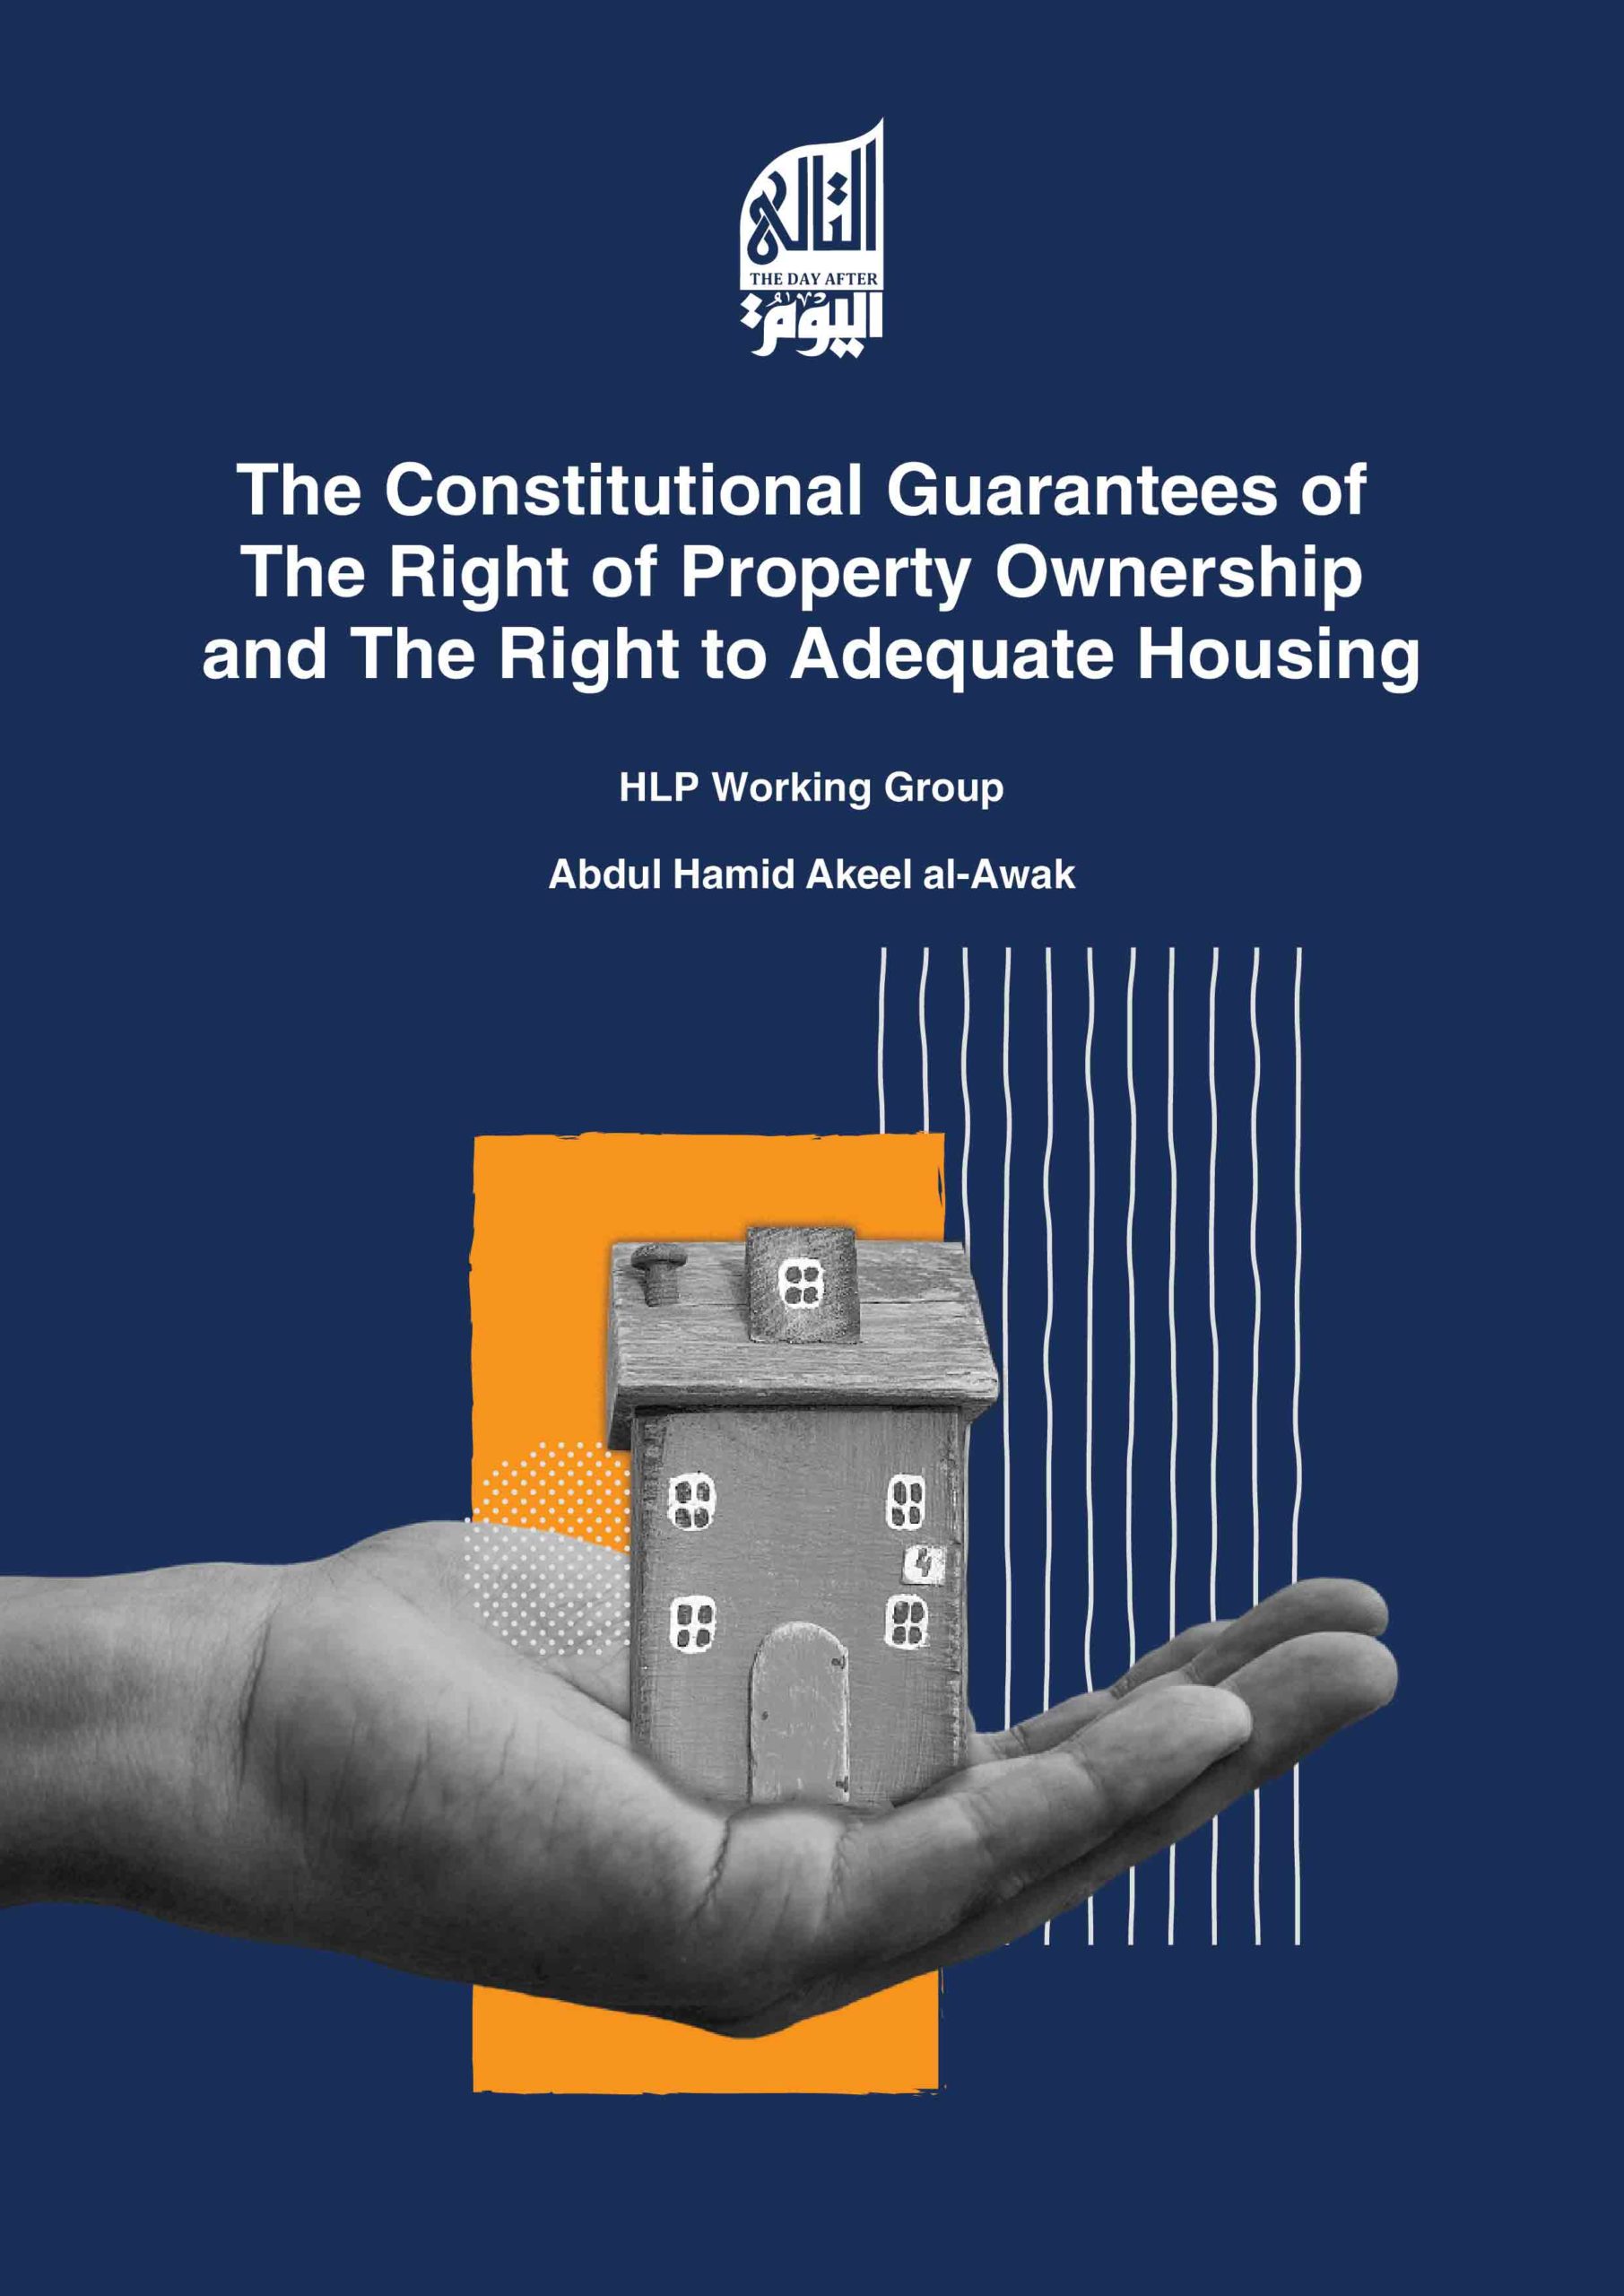 The Constitutional Guarantees of The Right of Property Ownership and The Right to Adequate Housing